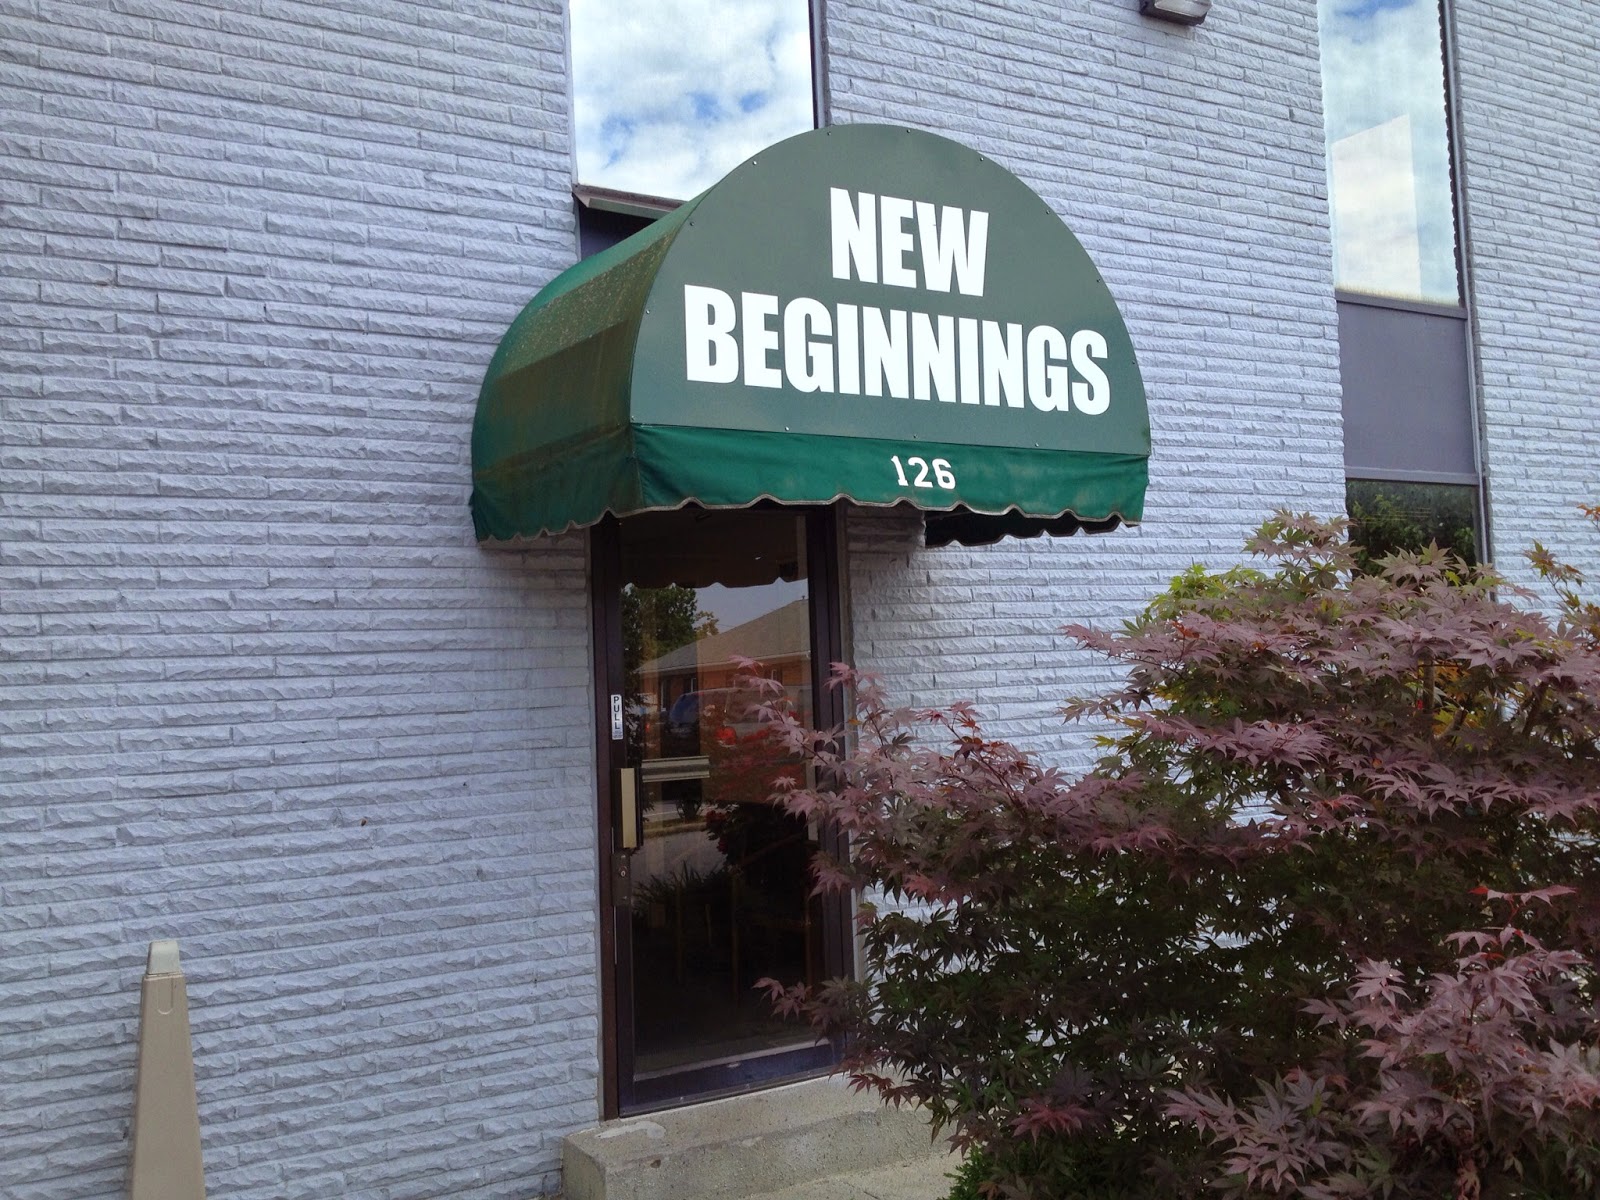 New Beginnings Education and Counseling Center 4400 Breckenridge Lane